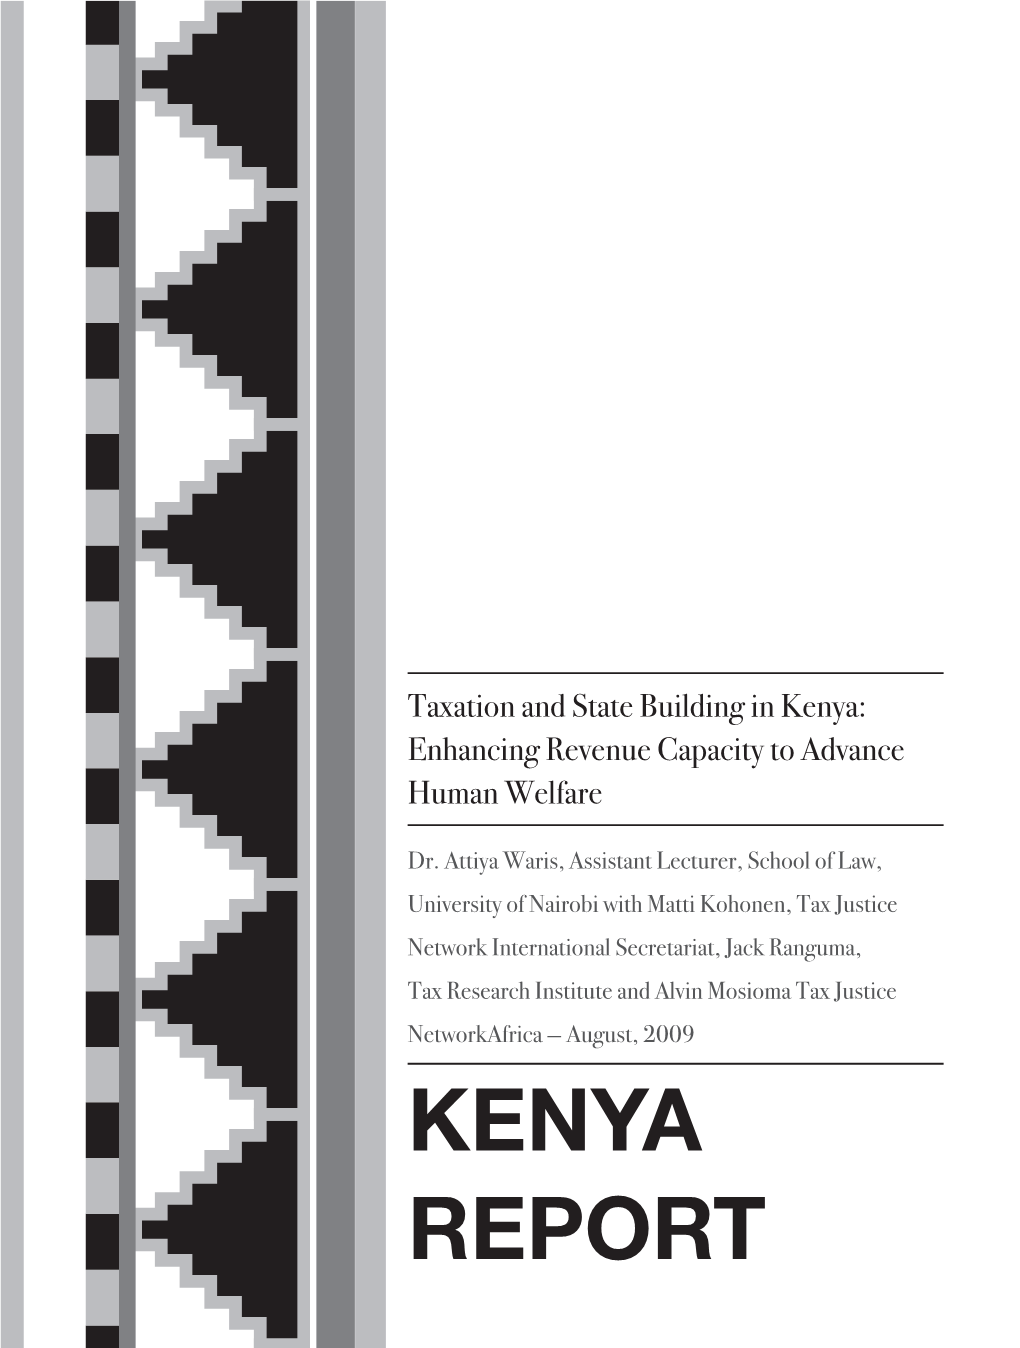 Taxation and State Building in Kenya: Enhancing Revenue Capacity to Advance Human Welfare